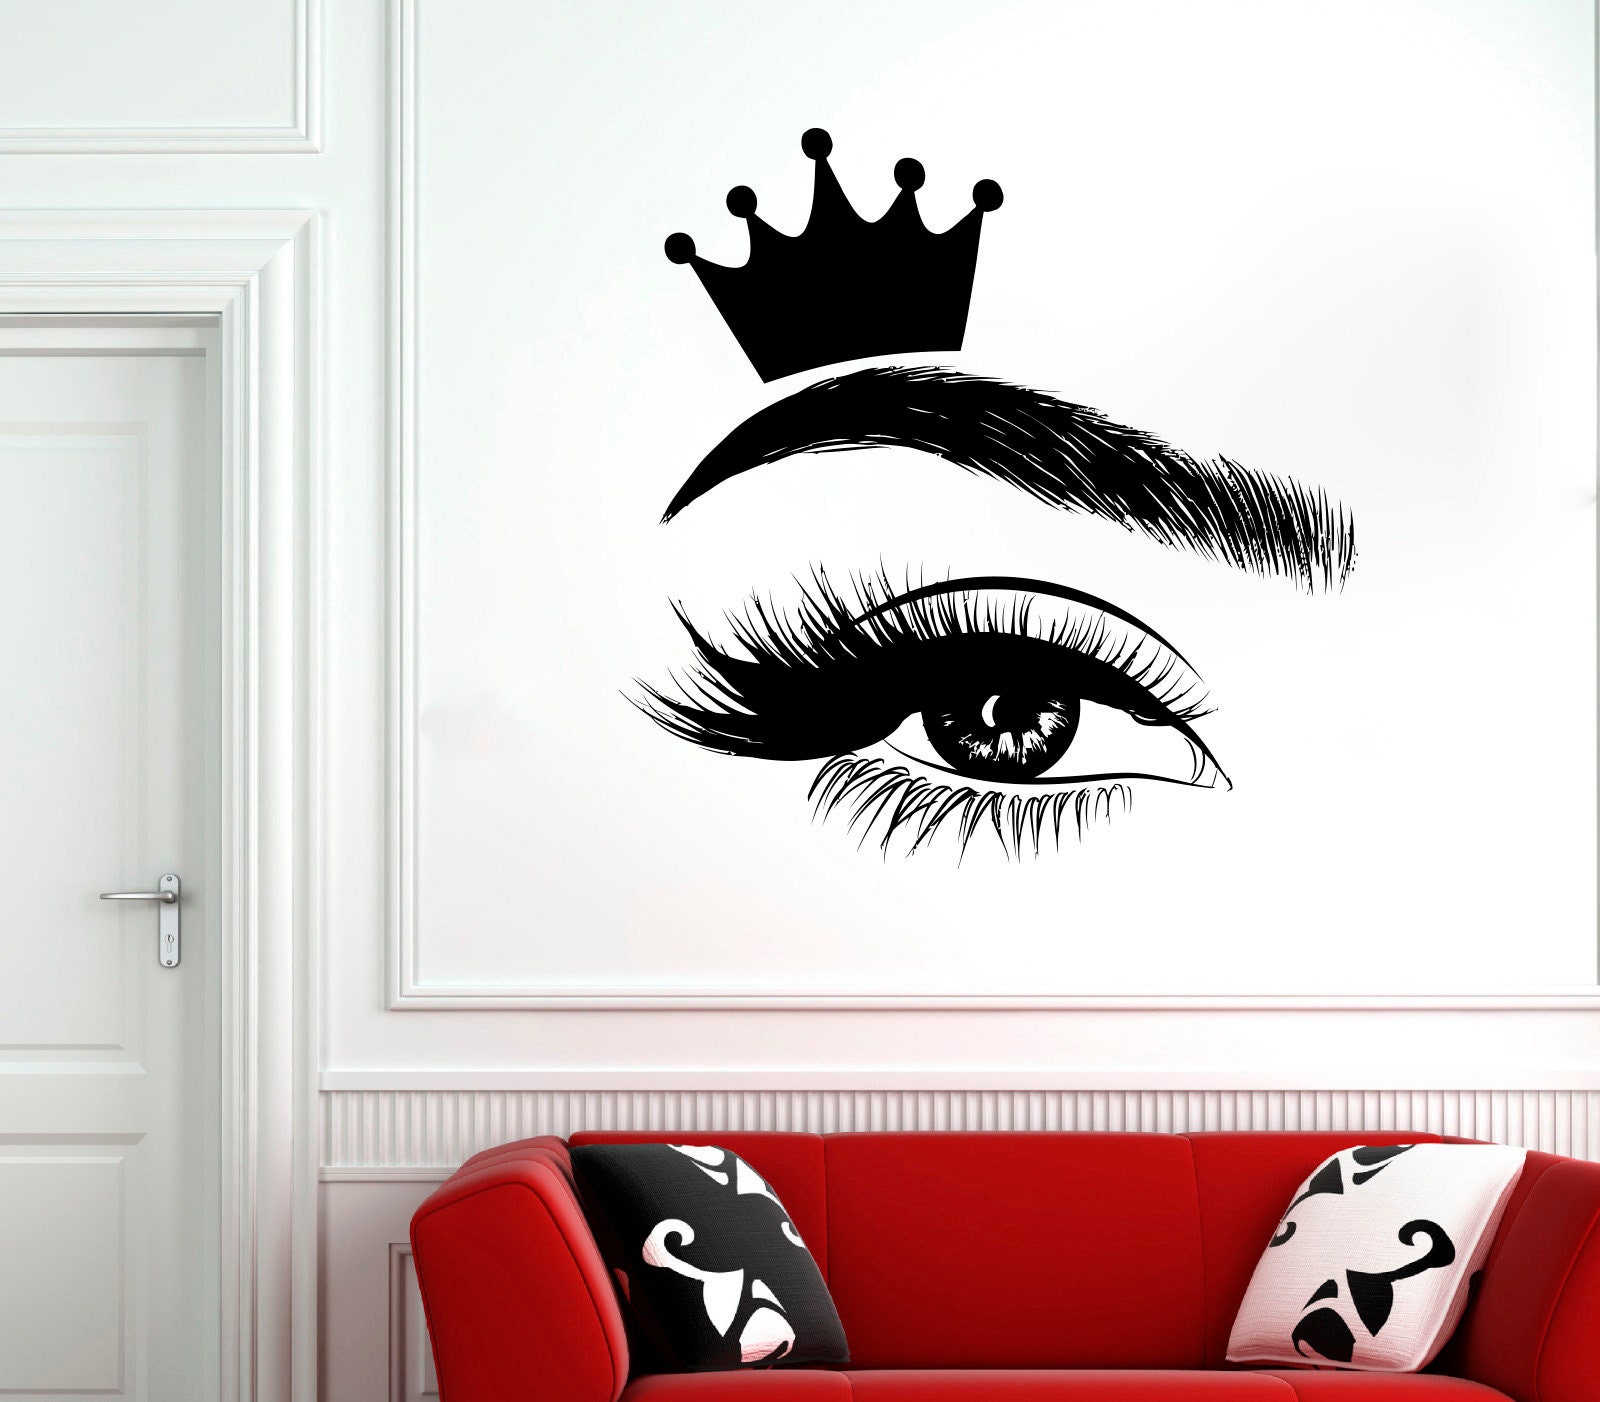 Live Lash Love Eyes Decal Sticker Brows Decal Makeup Lashes Salon Wall Decal 